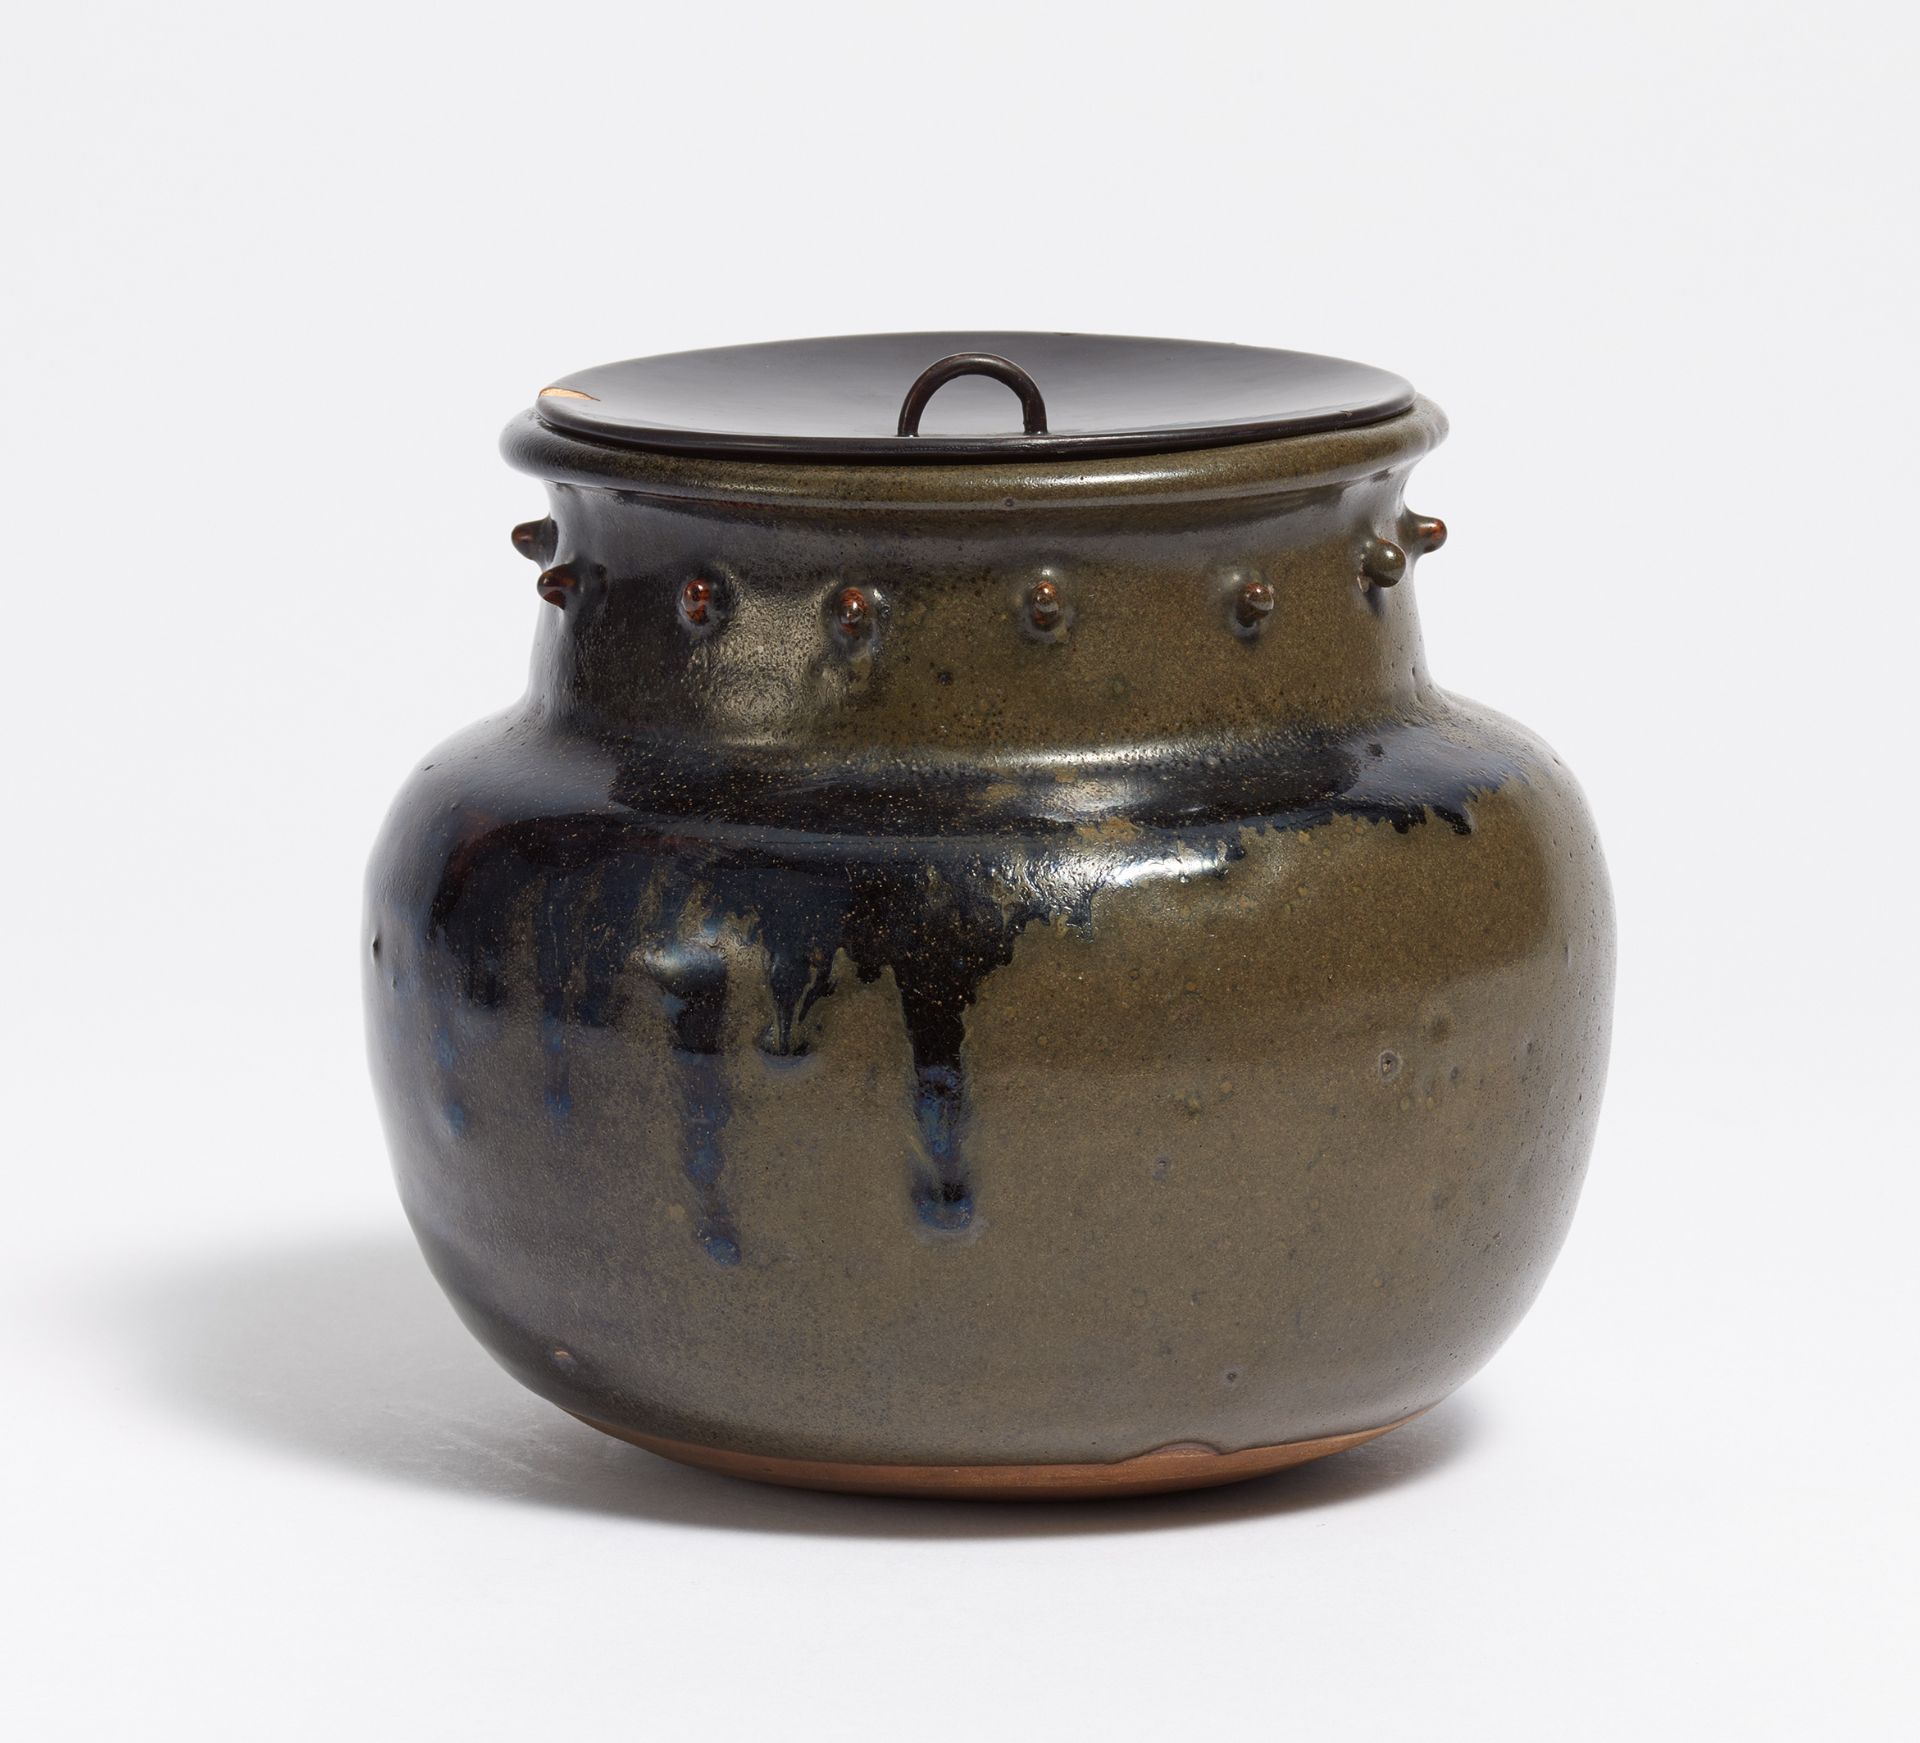 WATER RESERVOIRE (MIZUSASHI). Japan. Edo-Period (1603-1868). Leather brown stoneware, covered with a